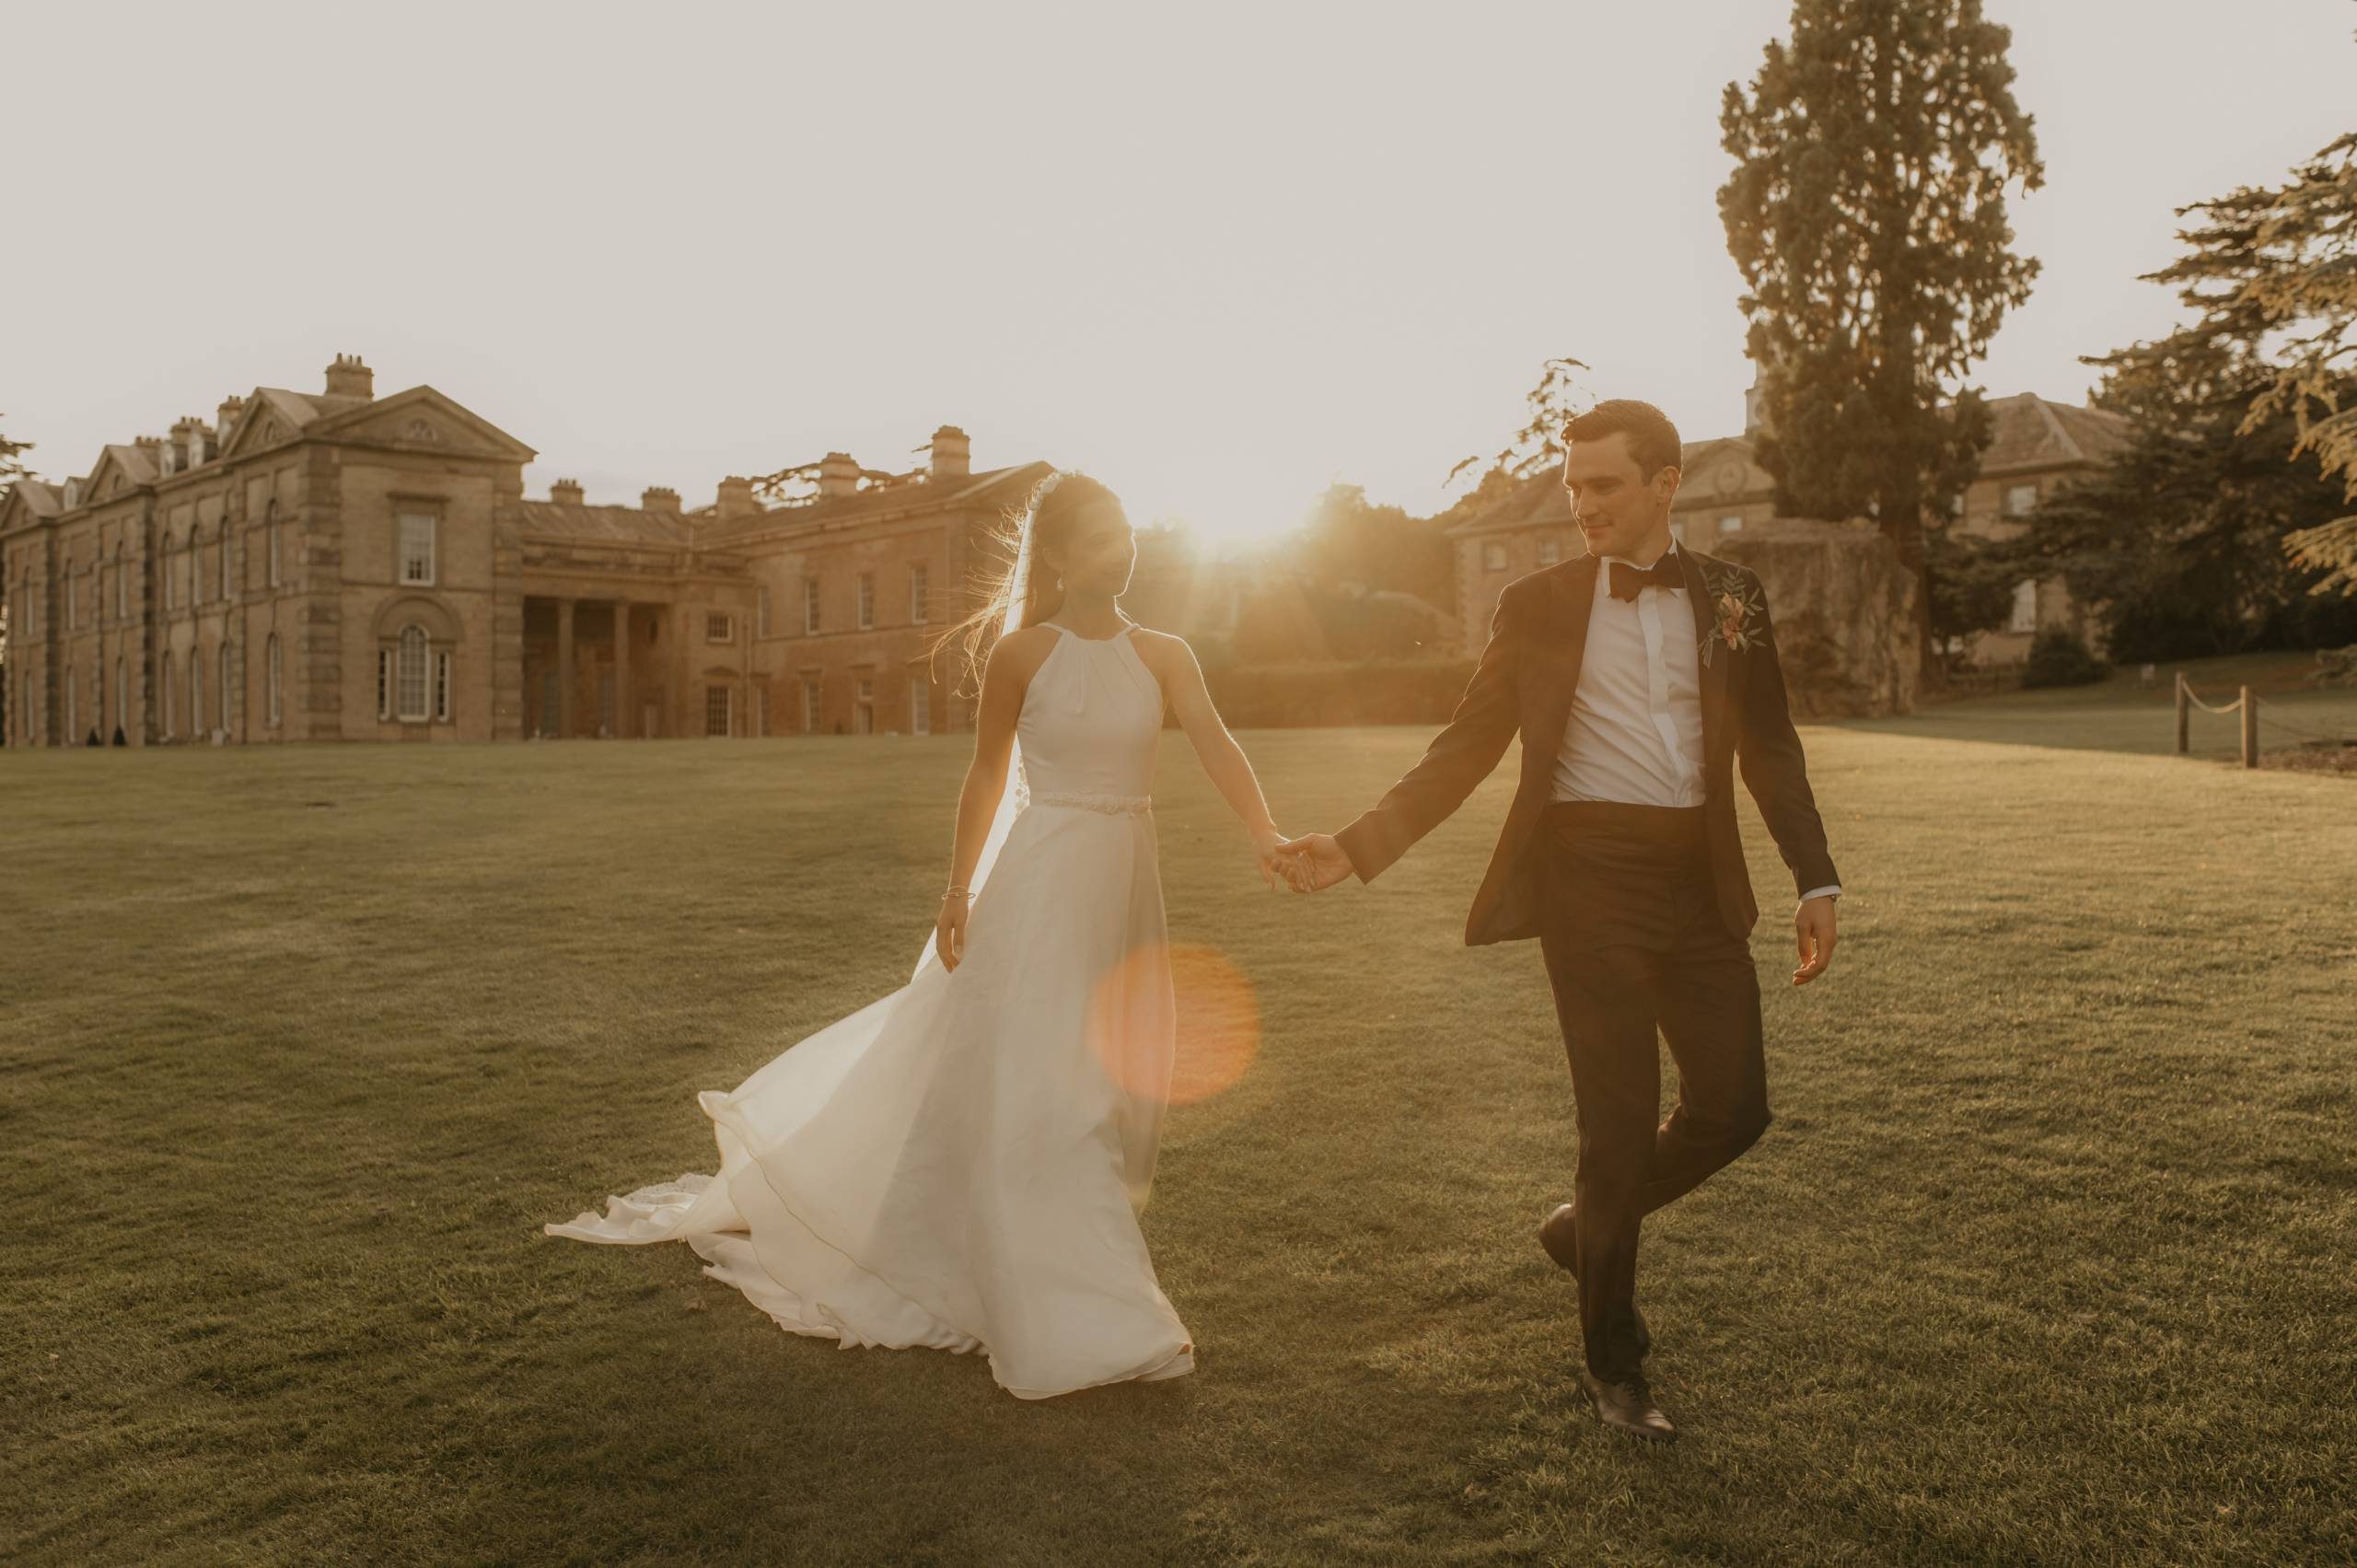 A bride and groom walk across a lawn in the golden light with a neoclassical building in the background